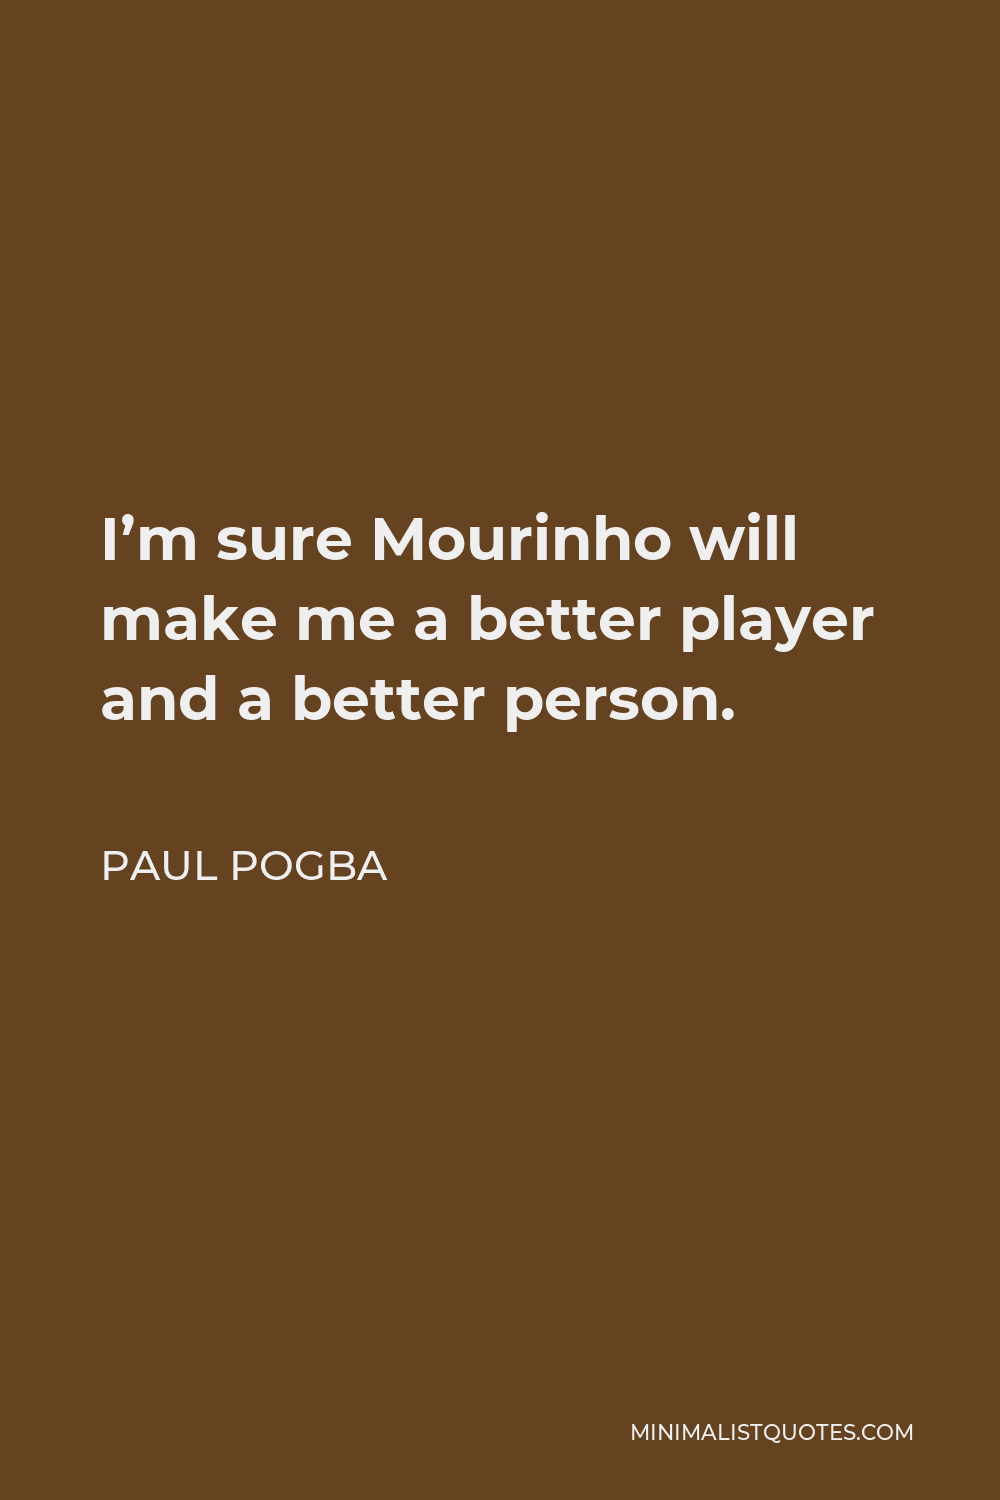 Paul Pogba Quote - I’m sure Mourinho will make me a better player and a better person.